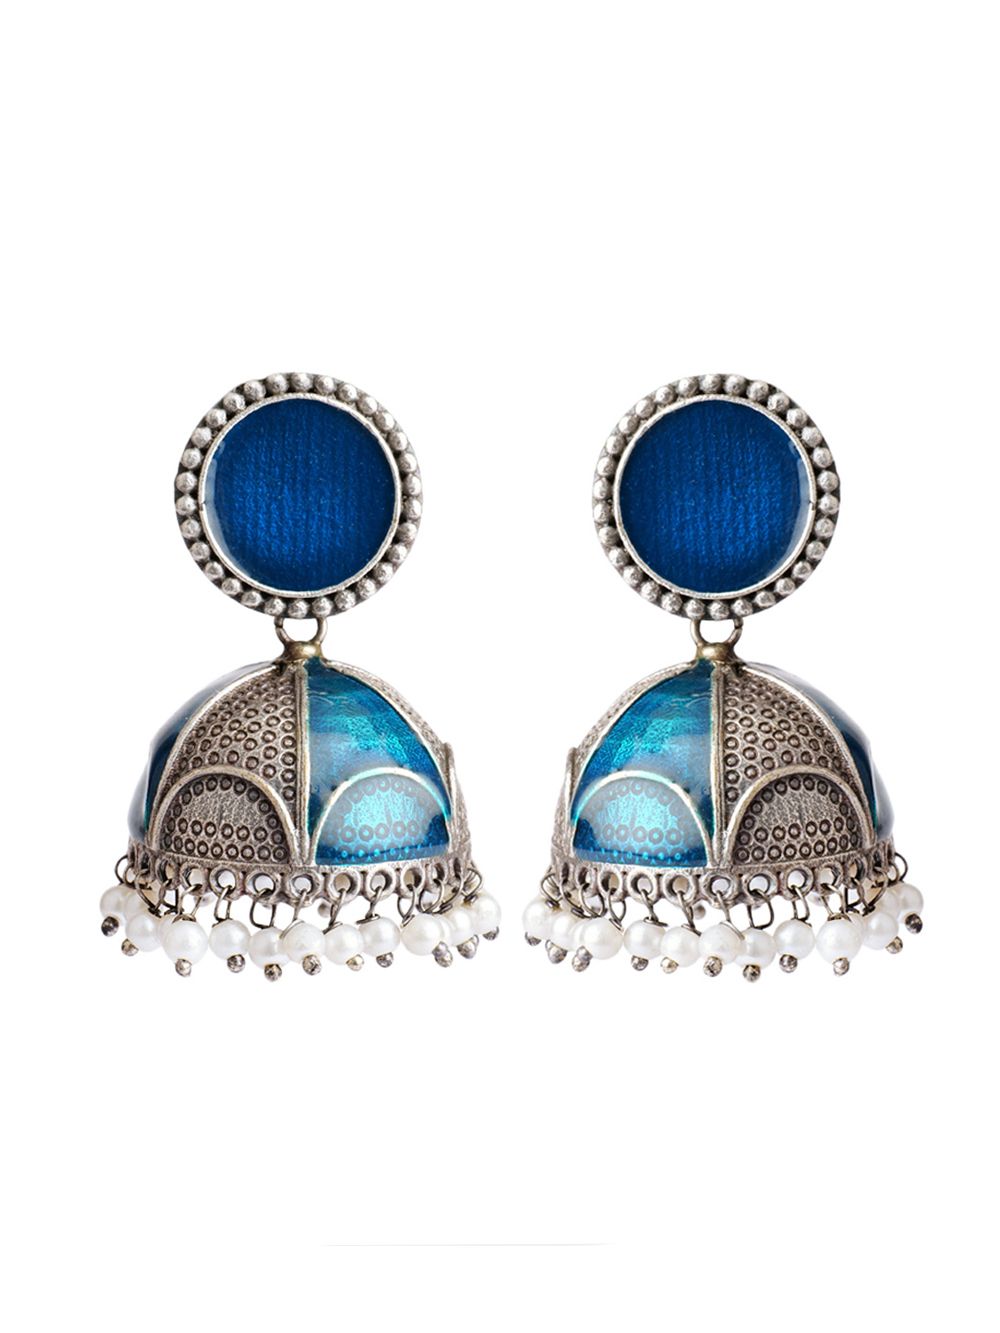 Blue Handcrafted  Silver Tone  Brass  Hand Painted Enamel Jhumki